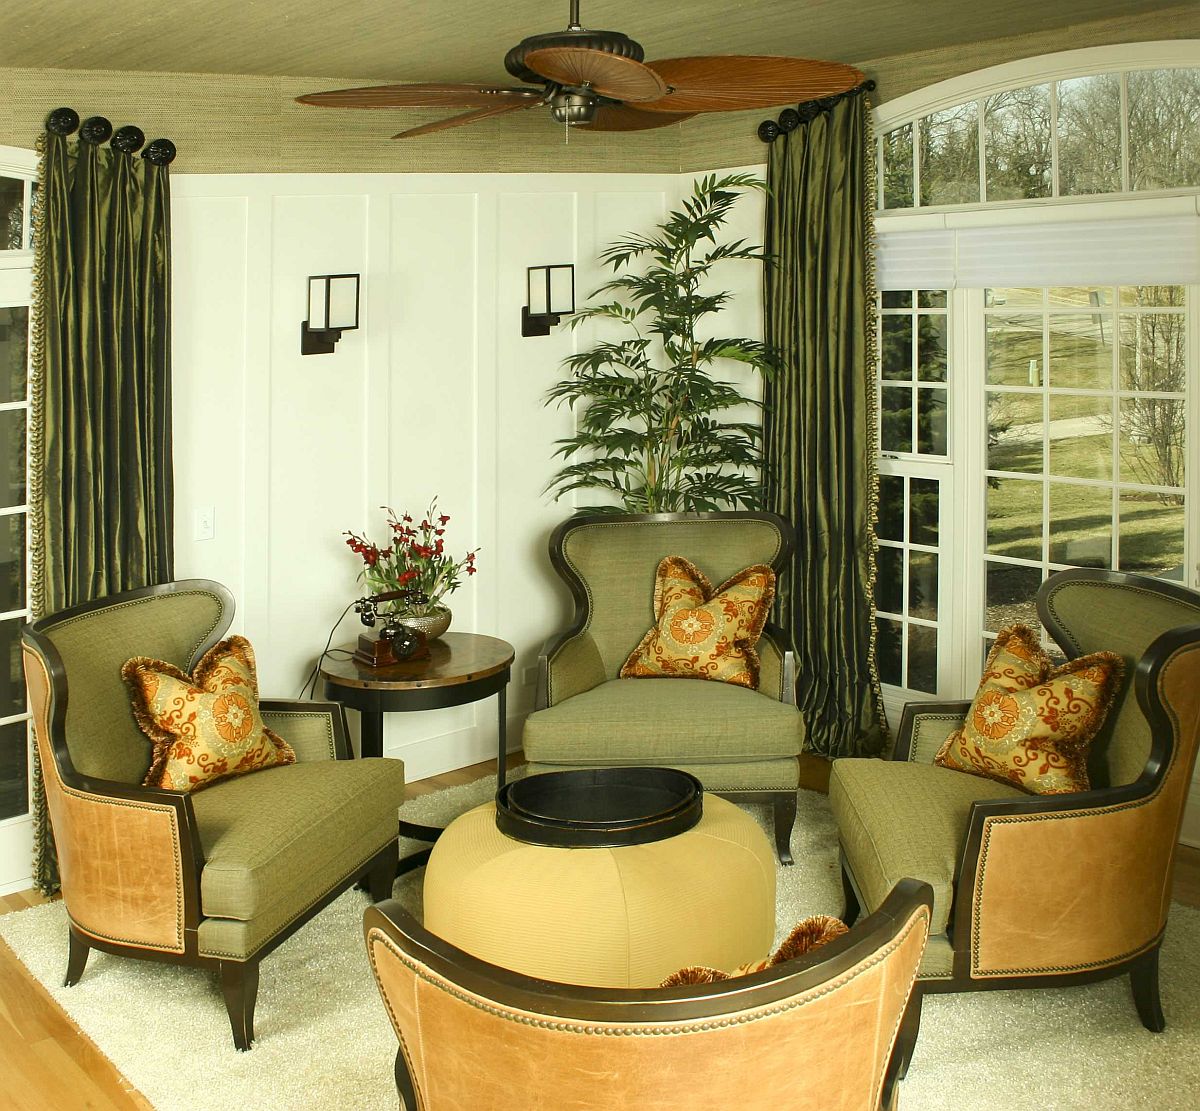 Ceiling, drapes, and chairs in olive green 